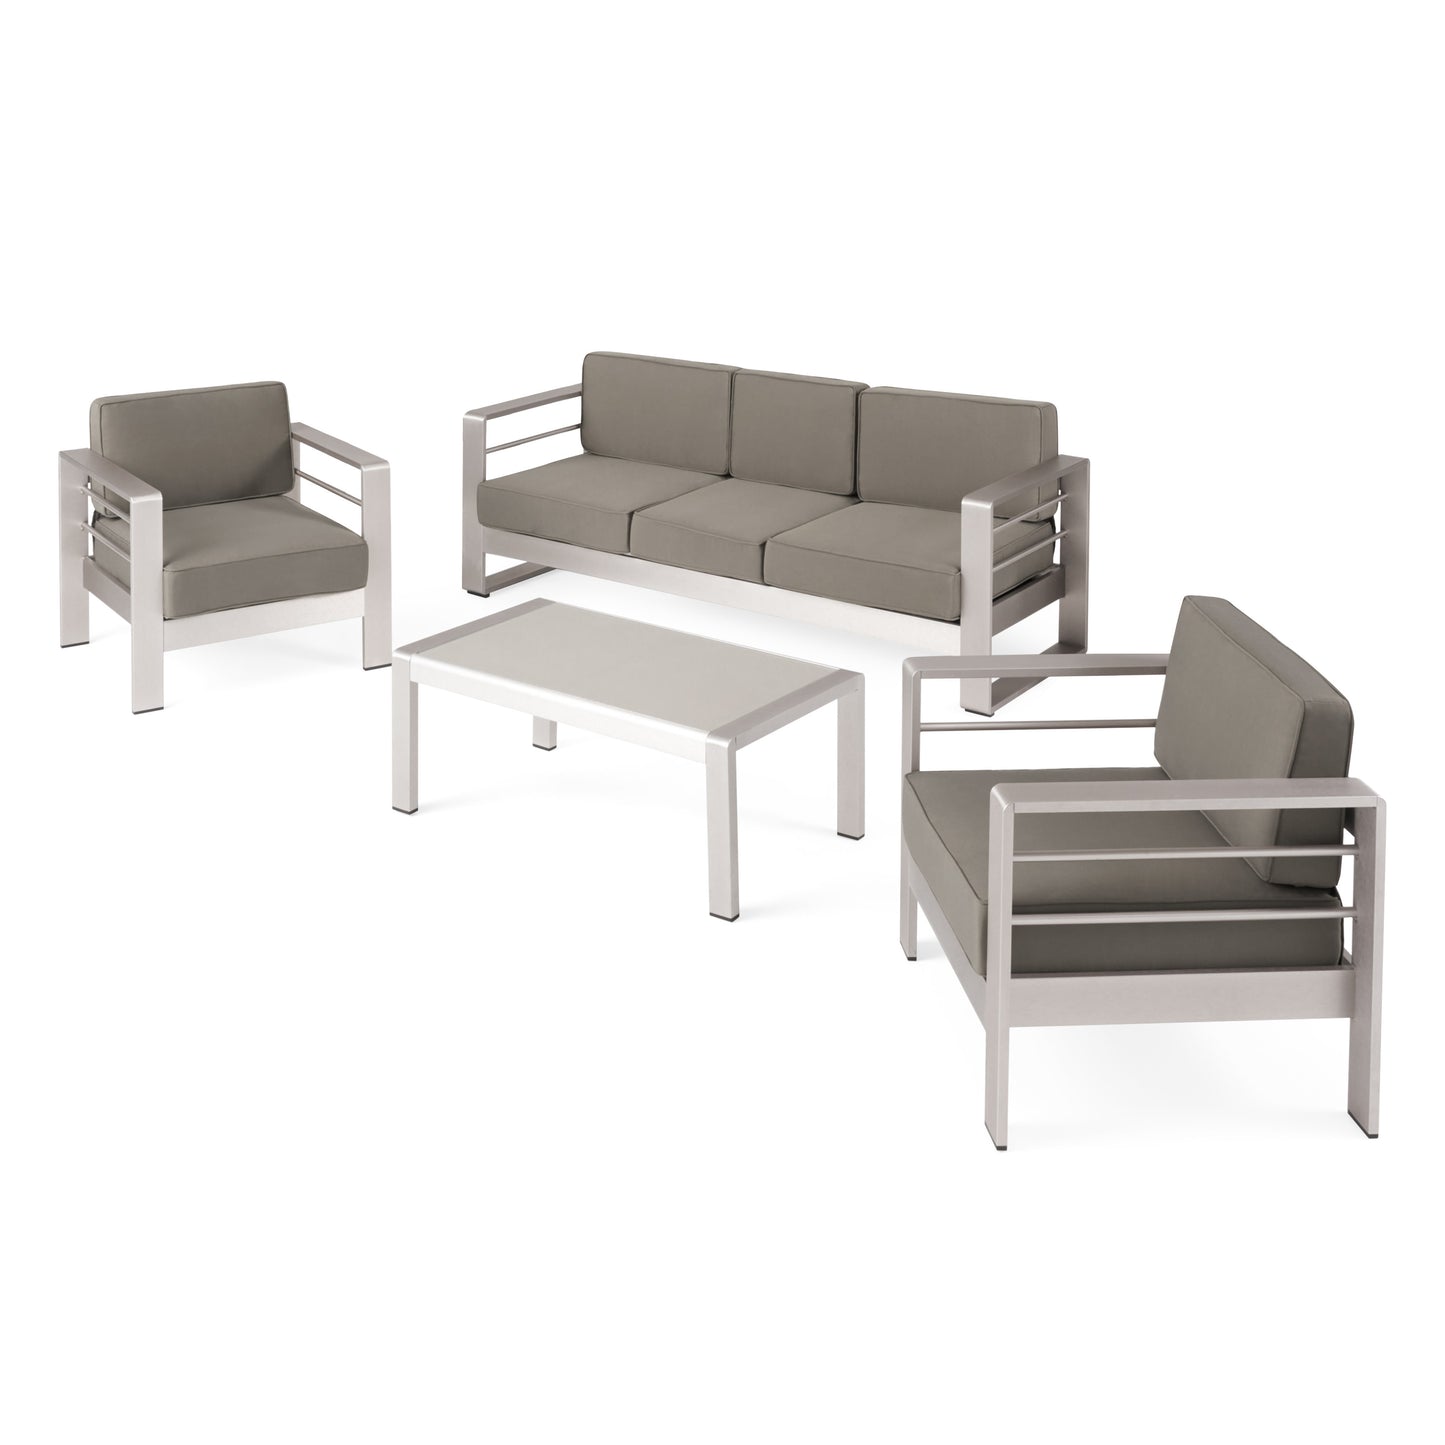 Crested Bay Outdoor Aluminum 5 Seater Chat Set with Sunbrella Cushions